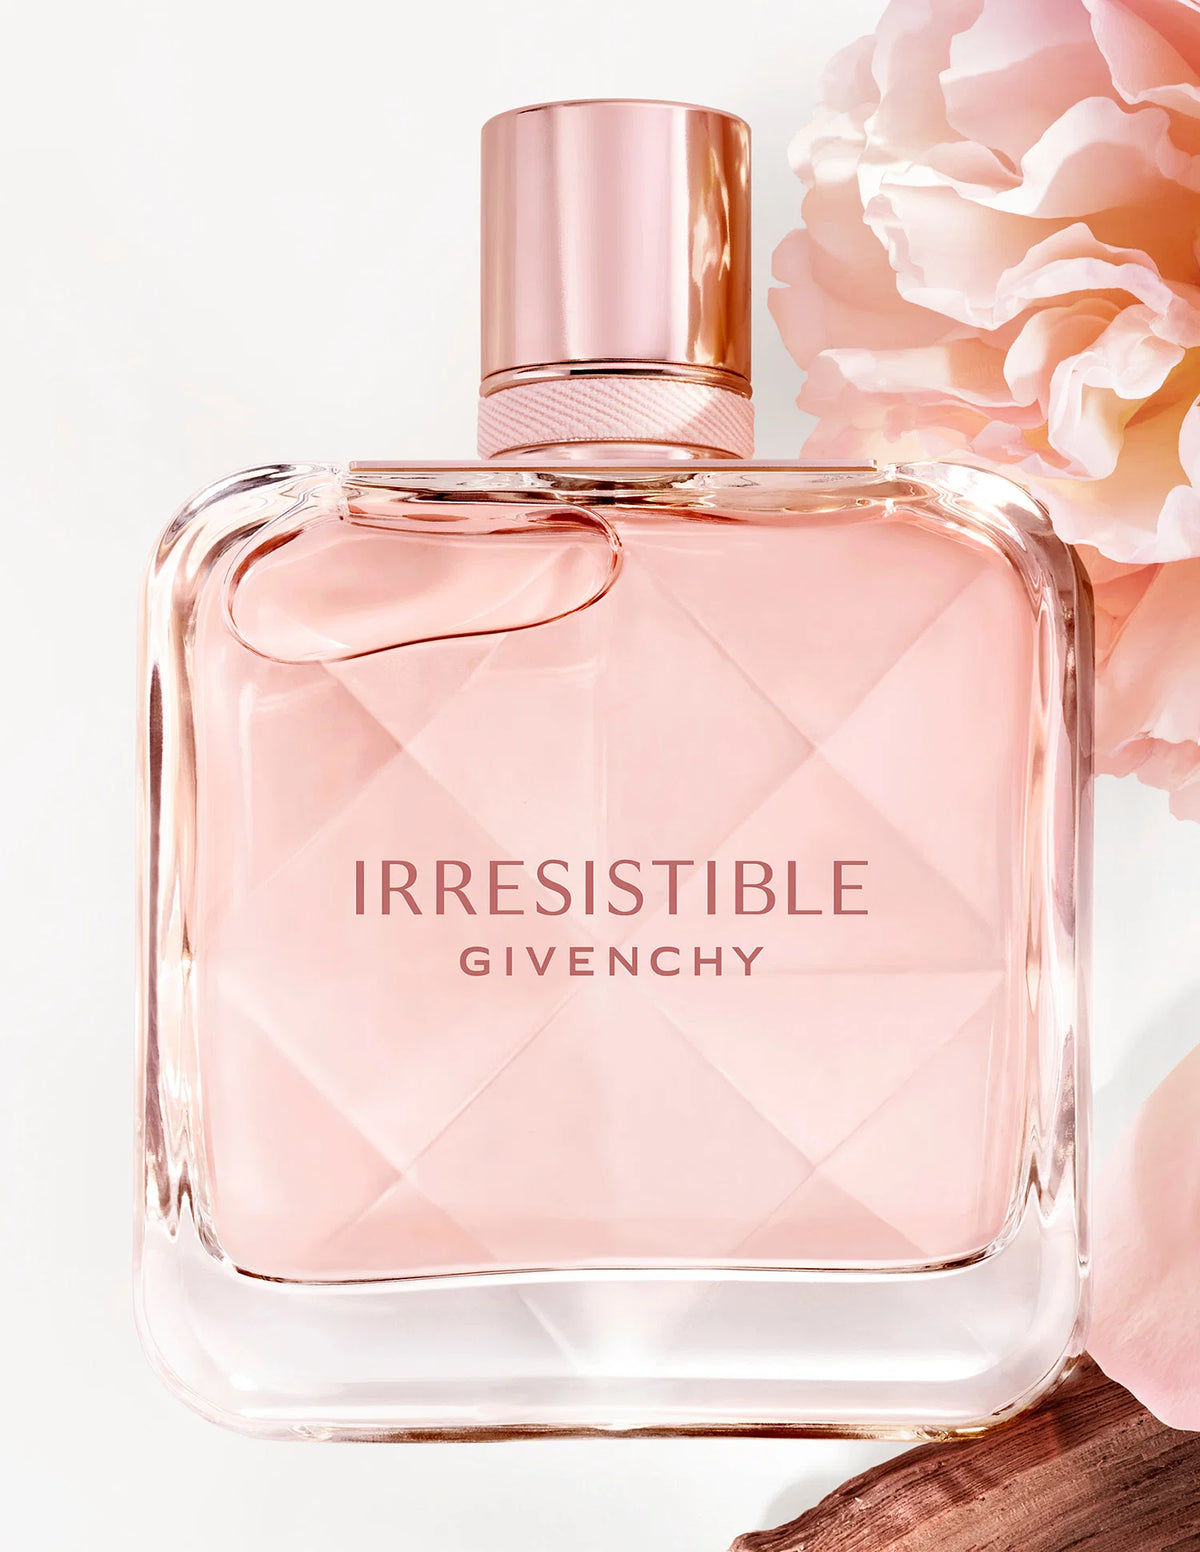 Irresistible by Givenchyfor Women - EDP - 50ml